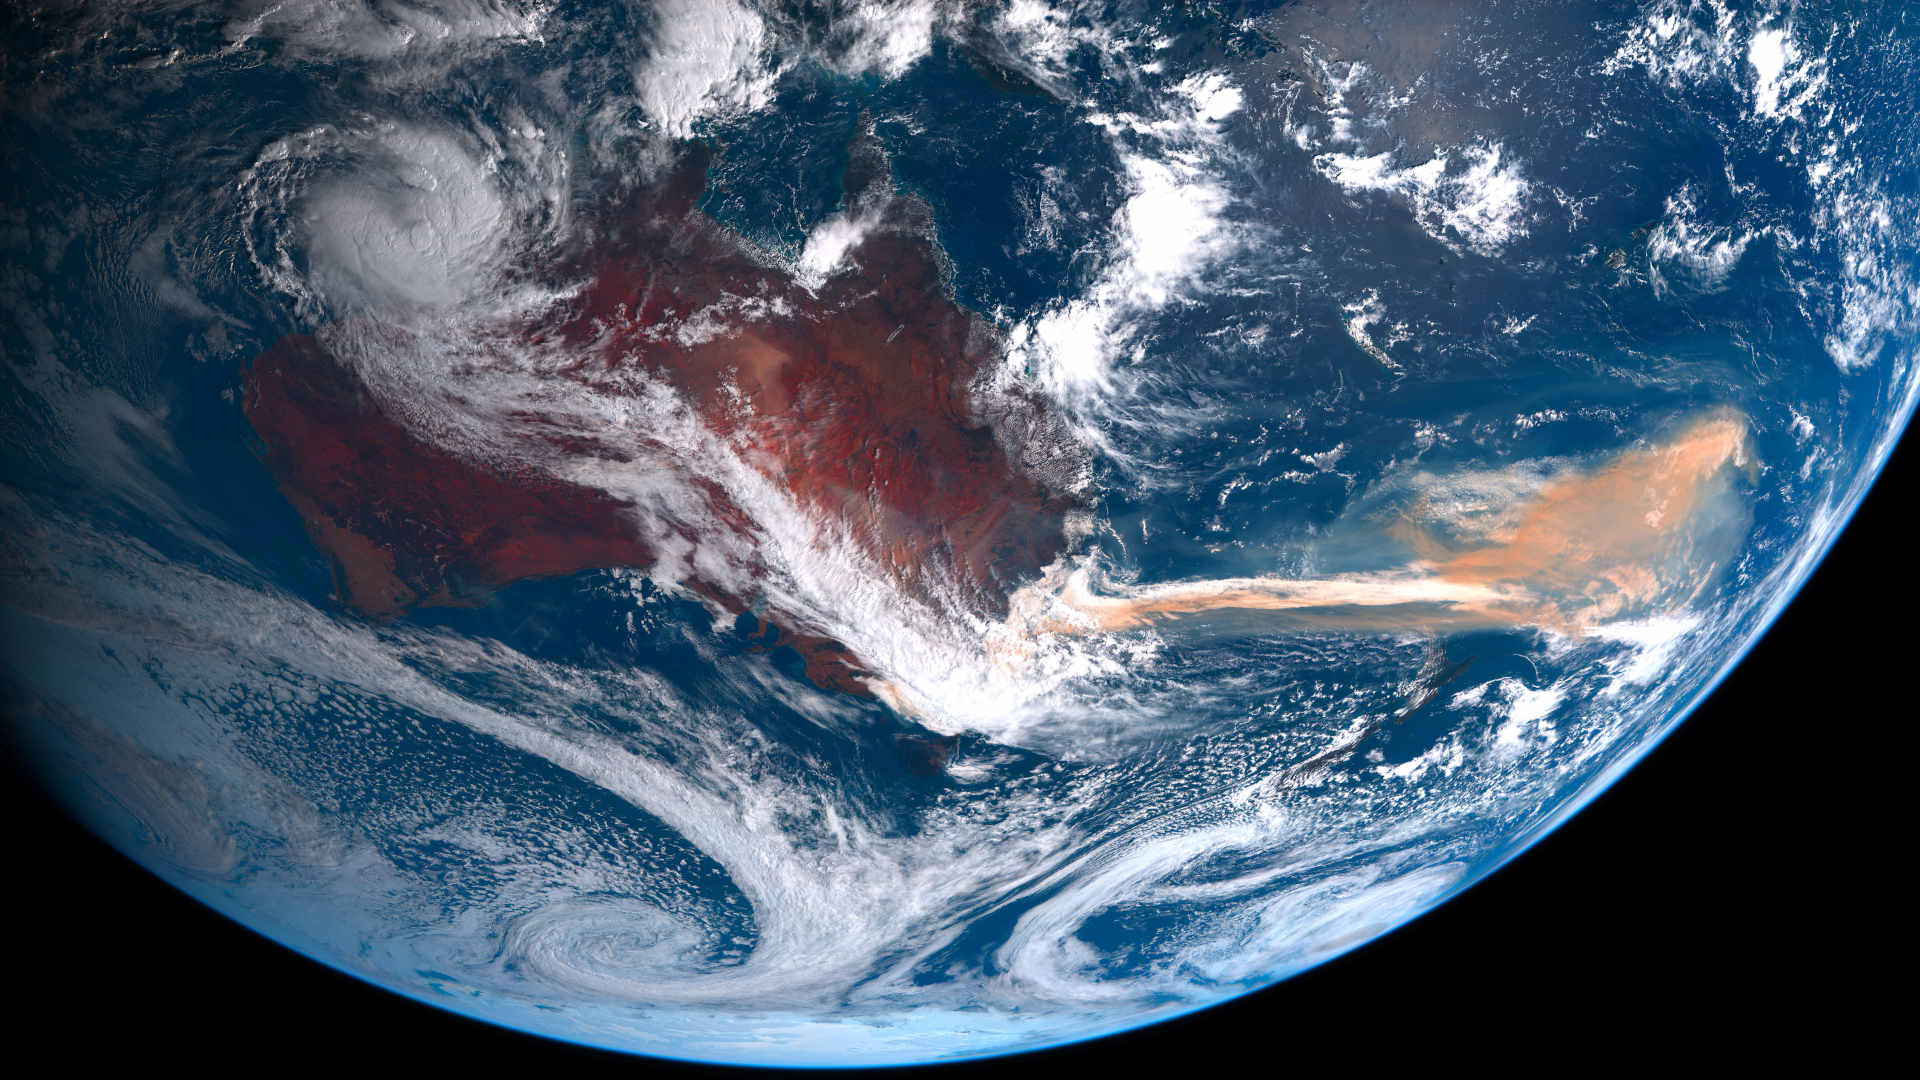 On January 6, 2020, the Japanese satellite Himawari-8 captured an image of the plume of smoke and ash streaming away from the fires on the southeastern coast of Australia.